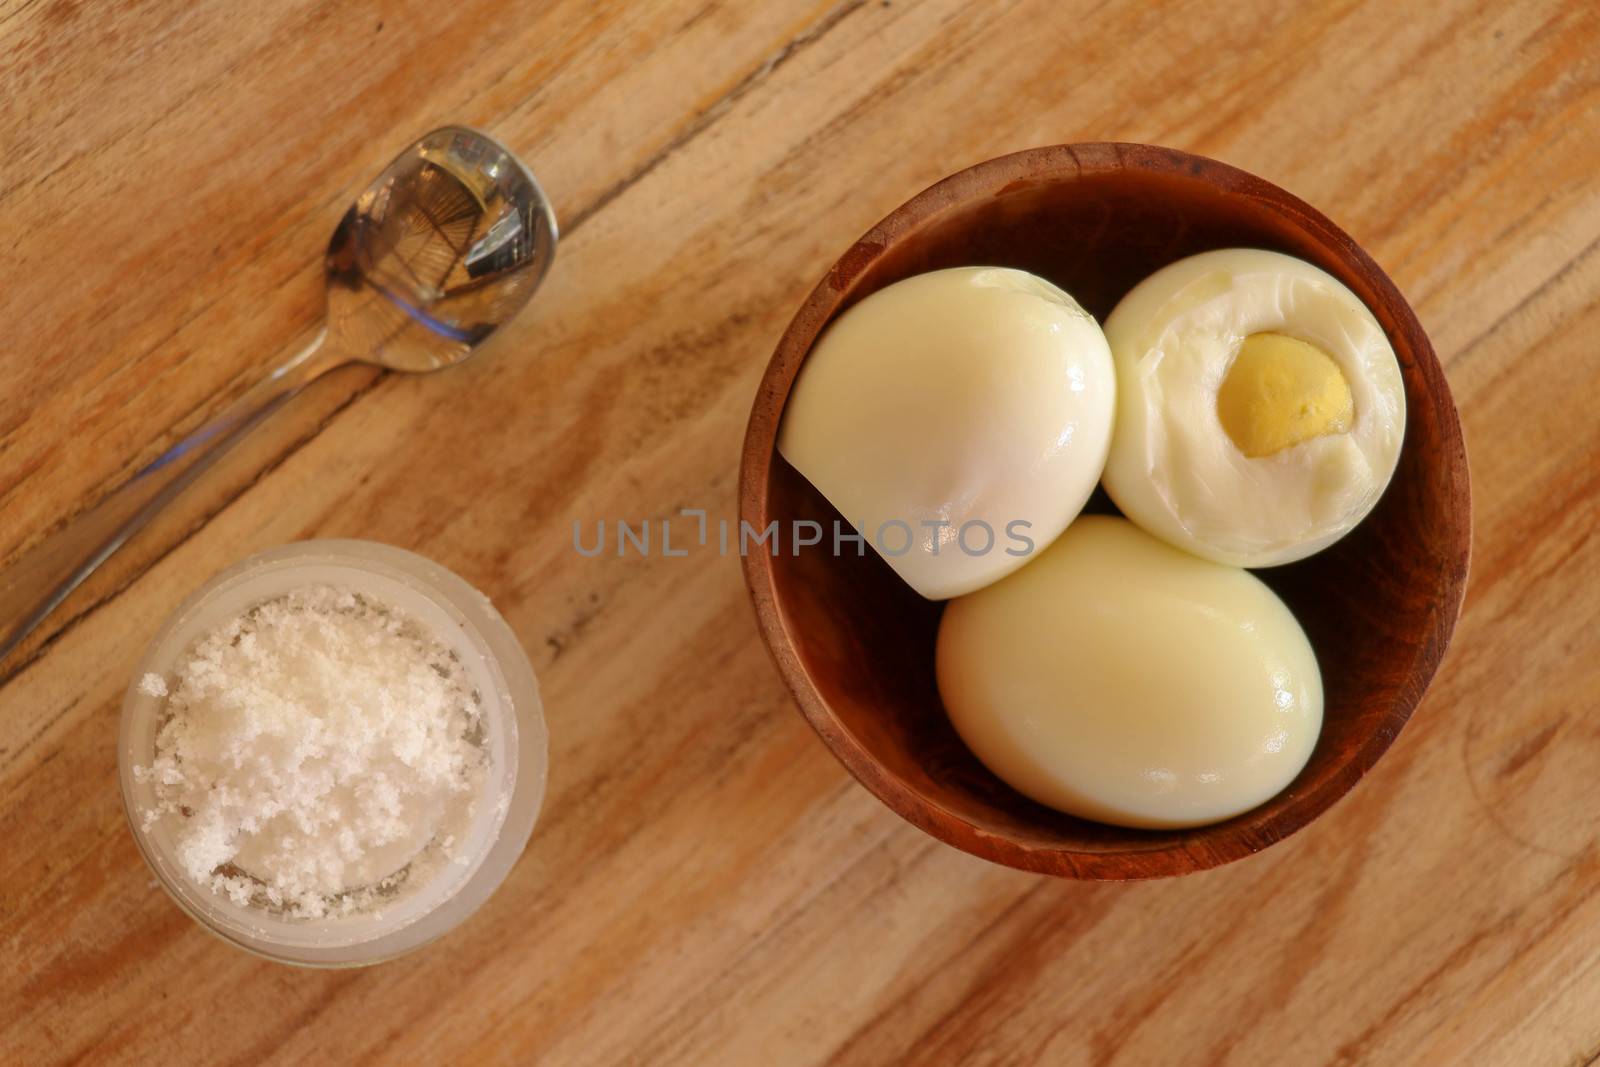 Boiled eggs with salt and herbs on a wooden table. Top view.